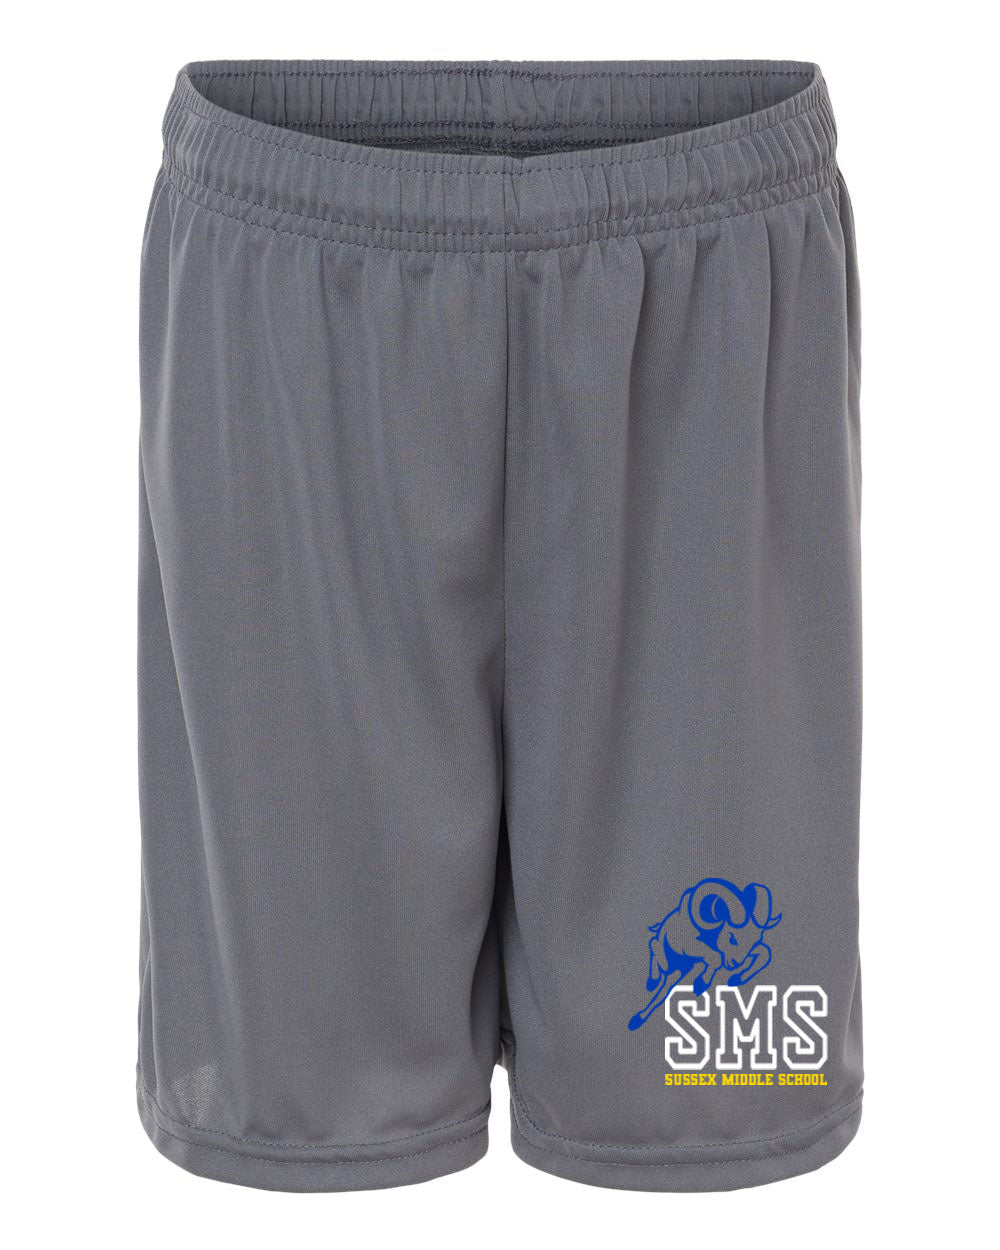 Sussex Middle Design 3 Performance Shorts